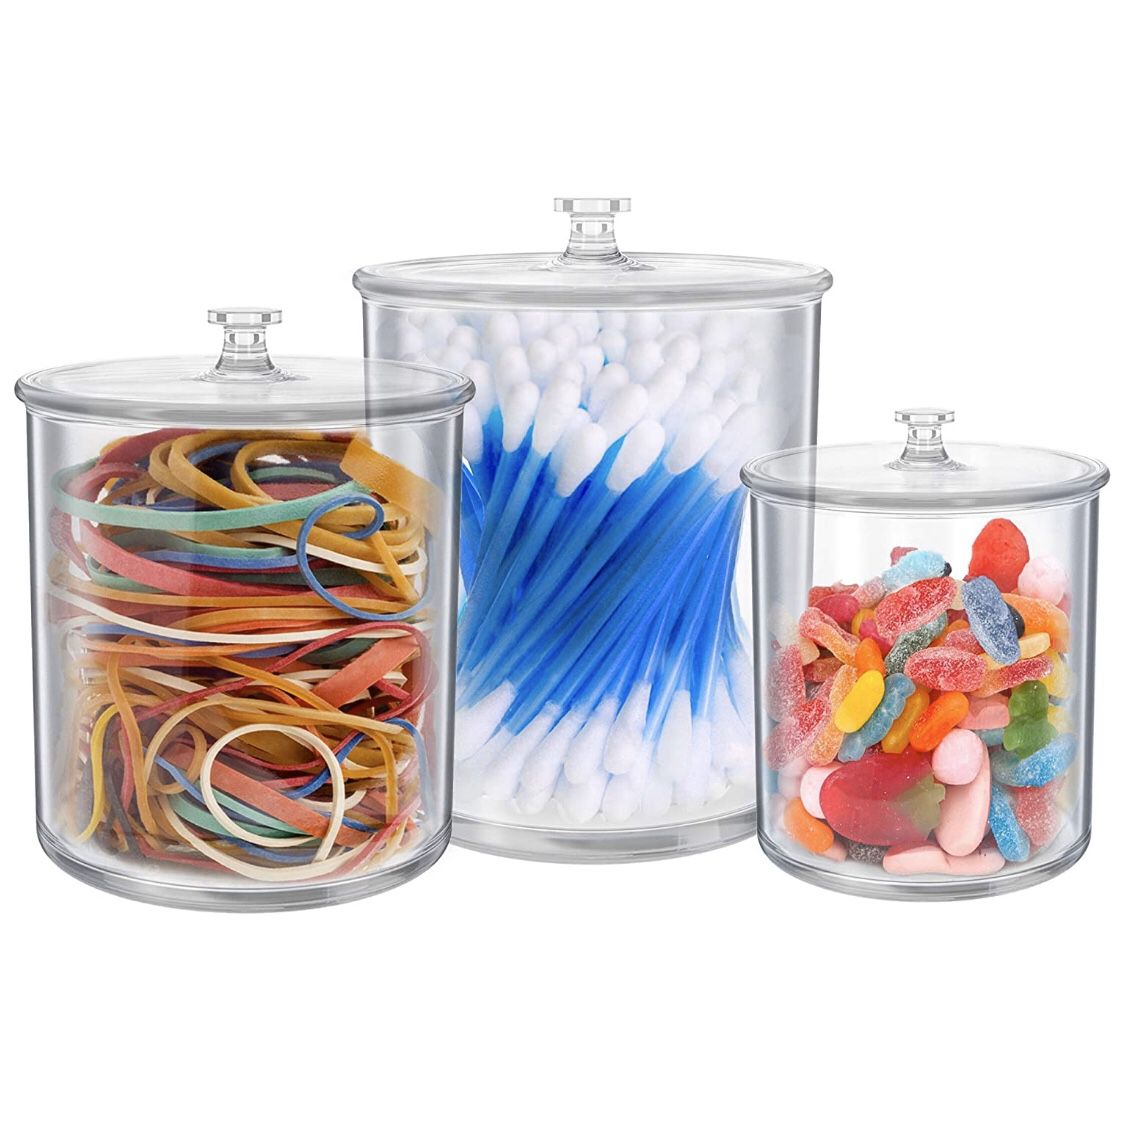 Set of 3 Small Apothecary Jars Bathroom – Multipurpose Acrylic Qtips Holder – Storage Organizer Canisters – Plastic Clear